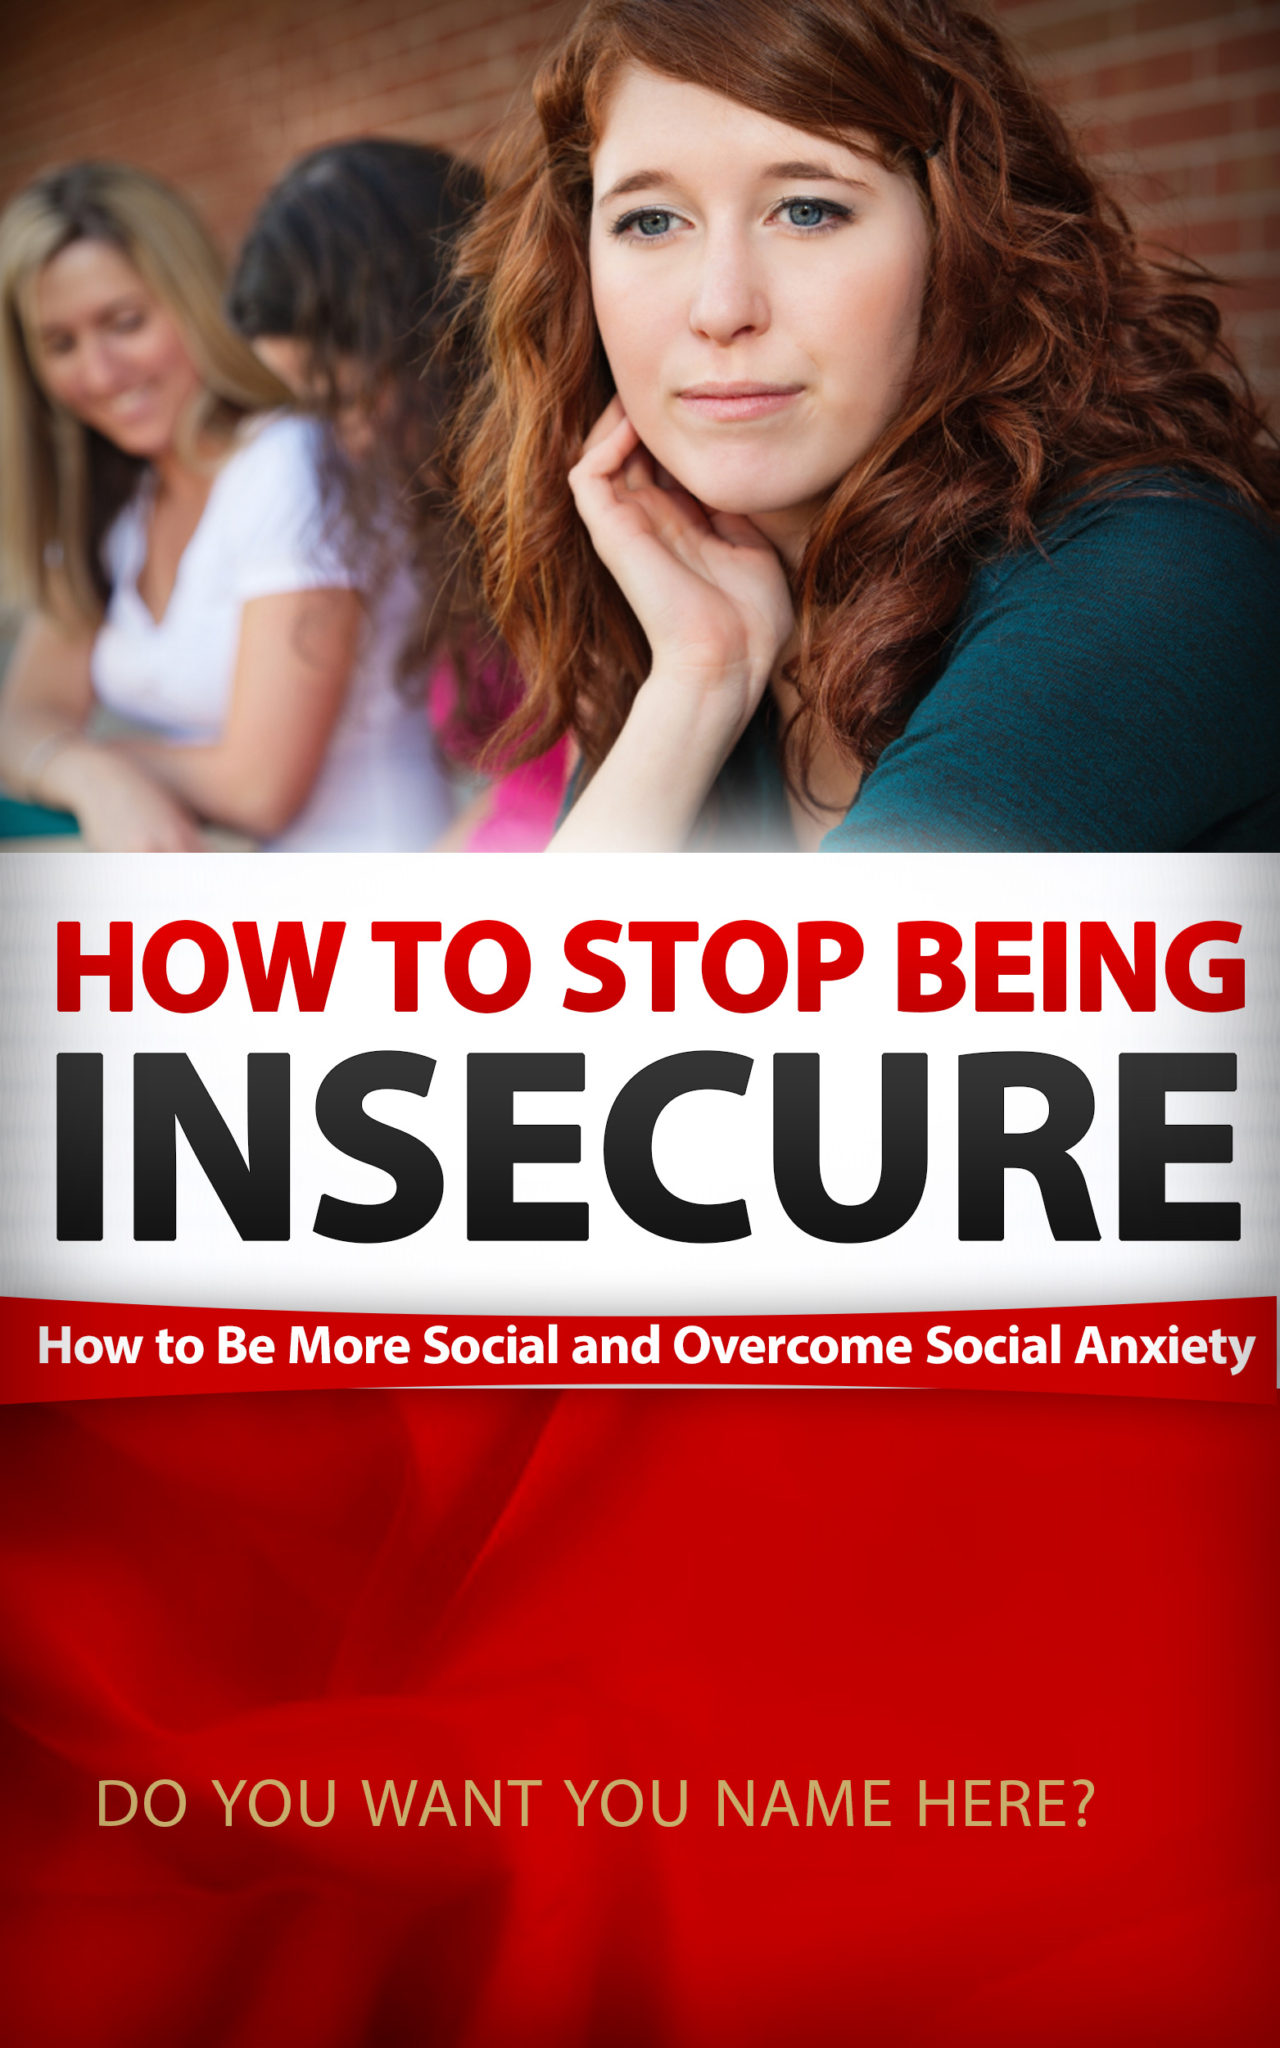 FREE: How To Stop Being Insecure: How to Be More Social and Overcome Social Anxiety by Kris Kaynes